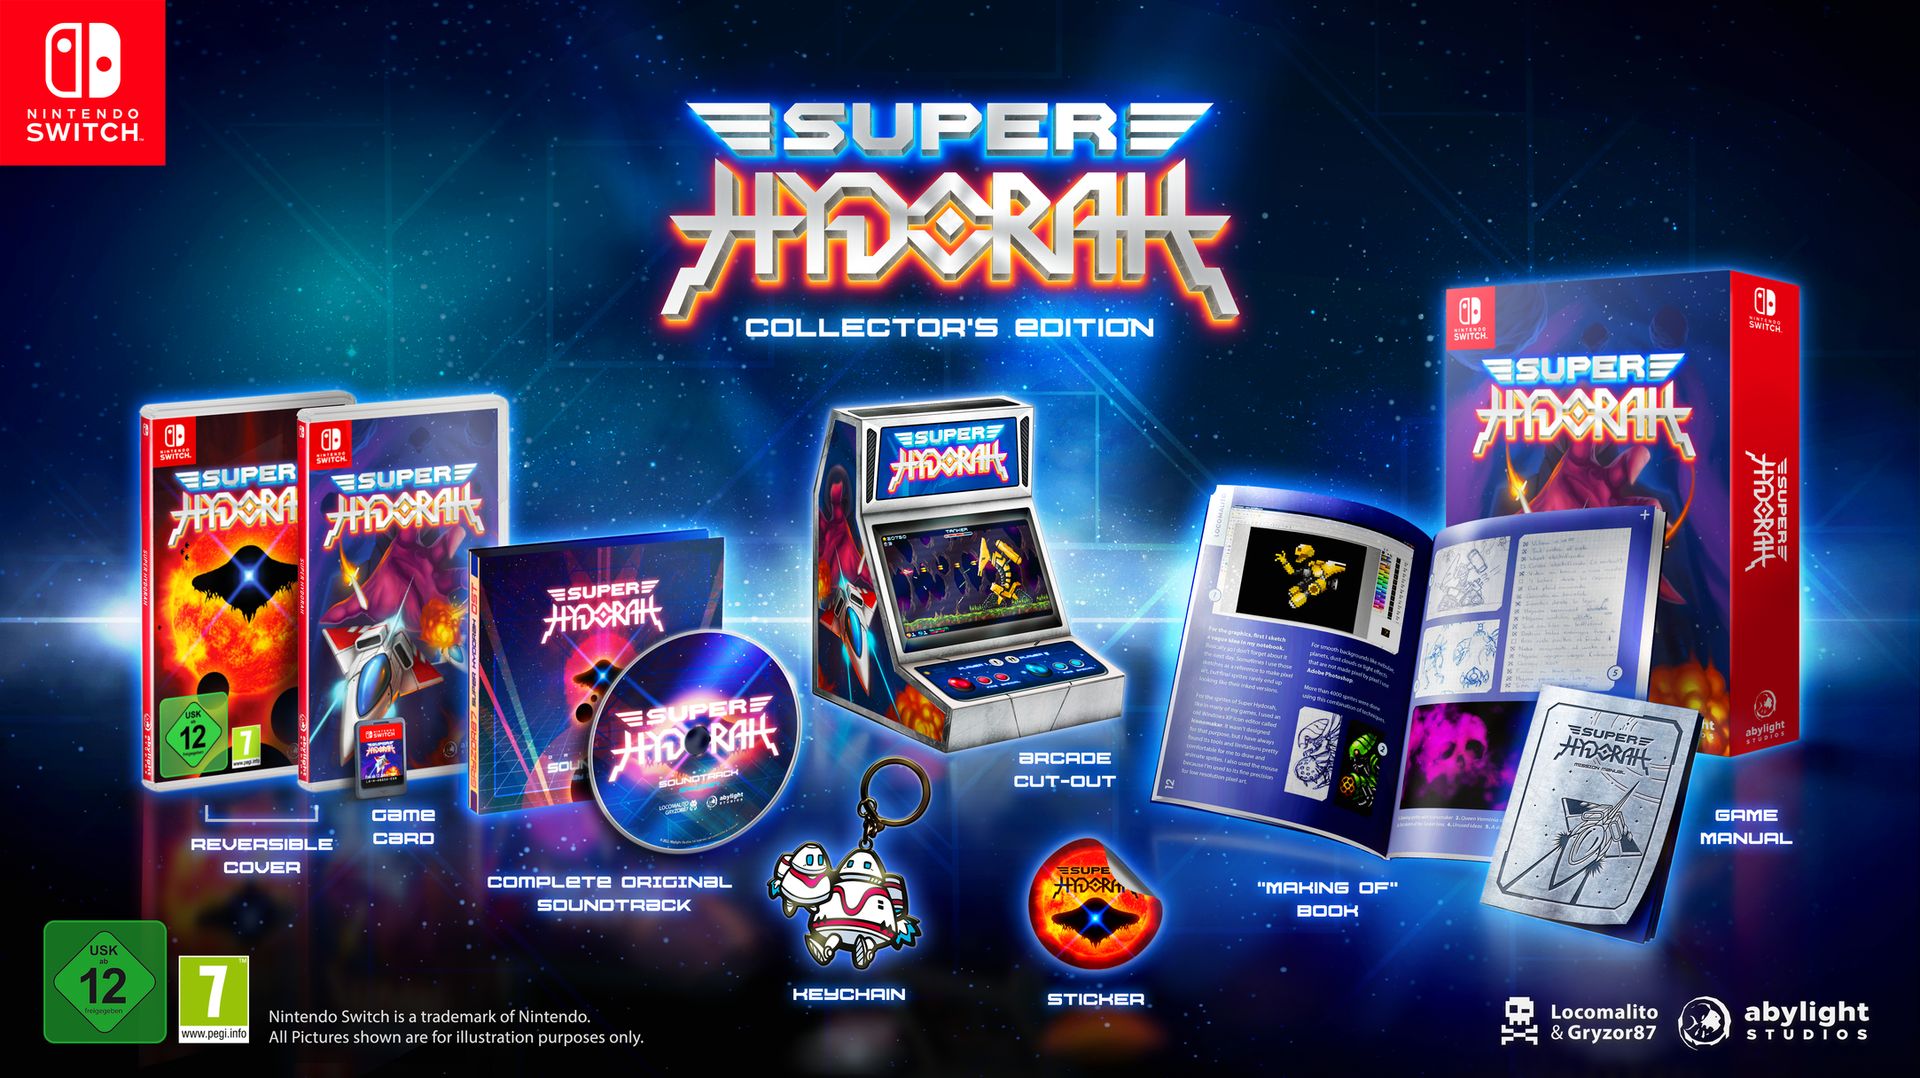 Super Hydorah Collector's Edition for Nintendo Switch